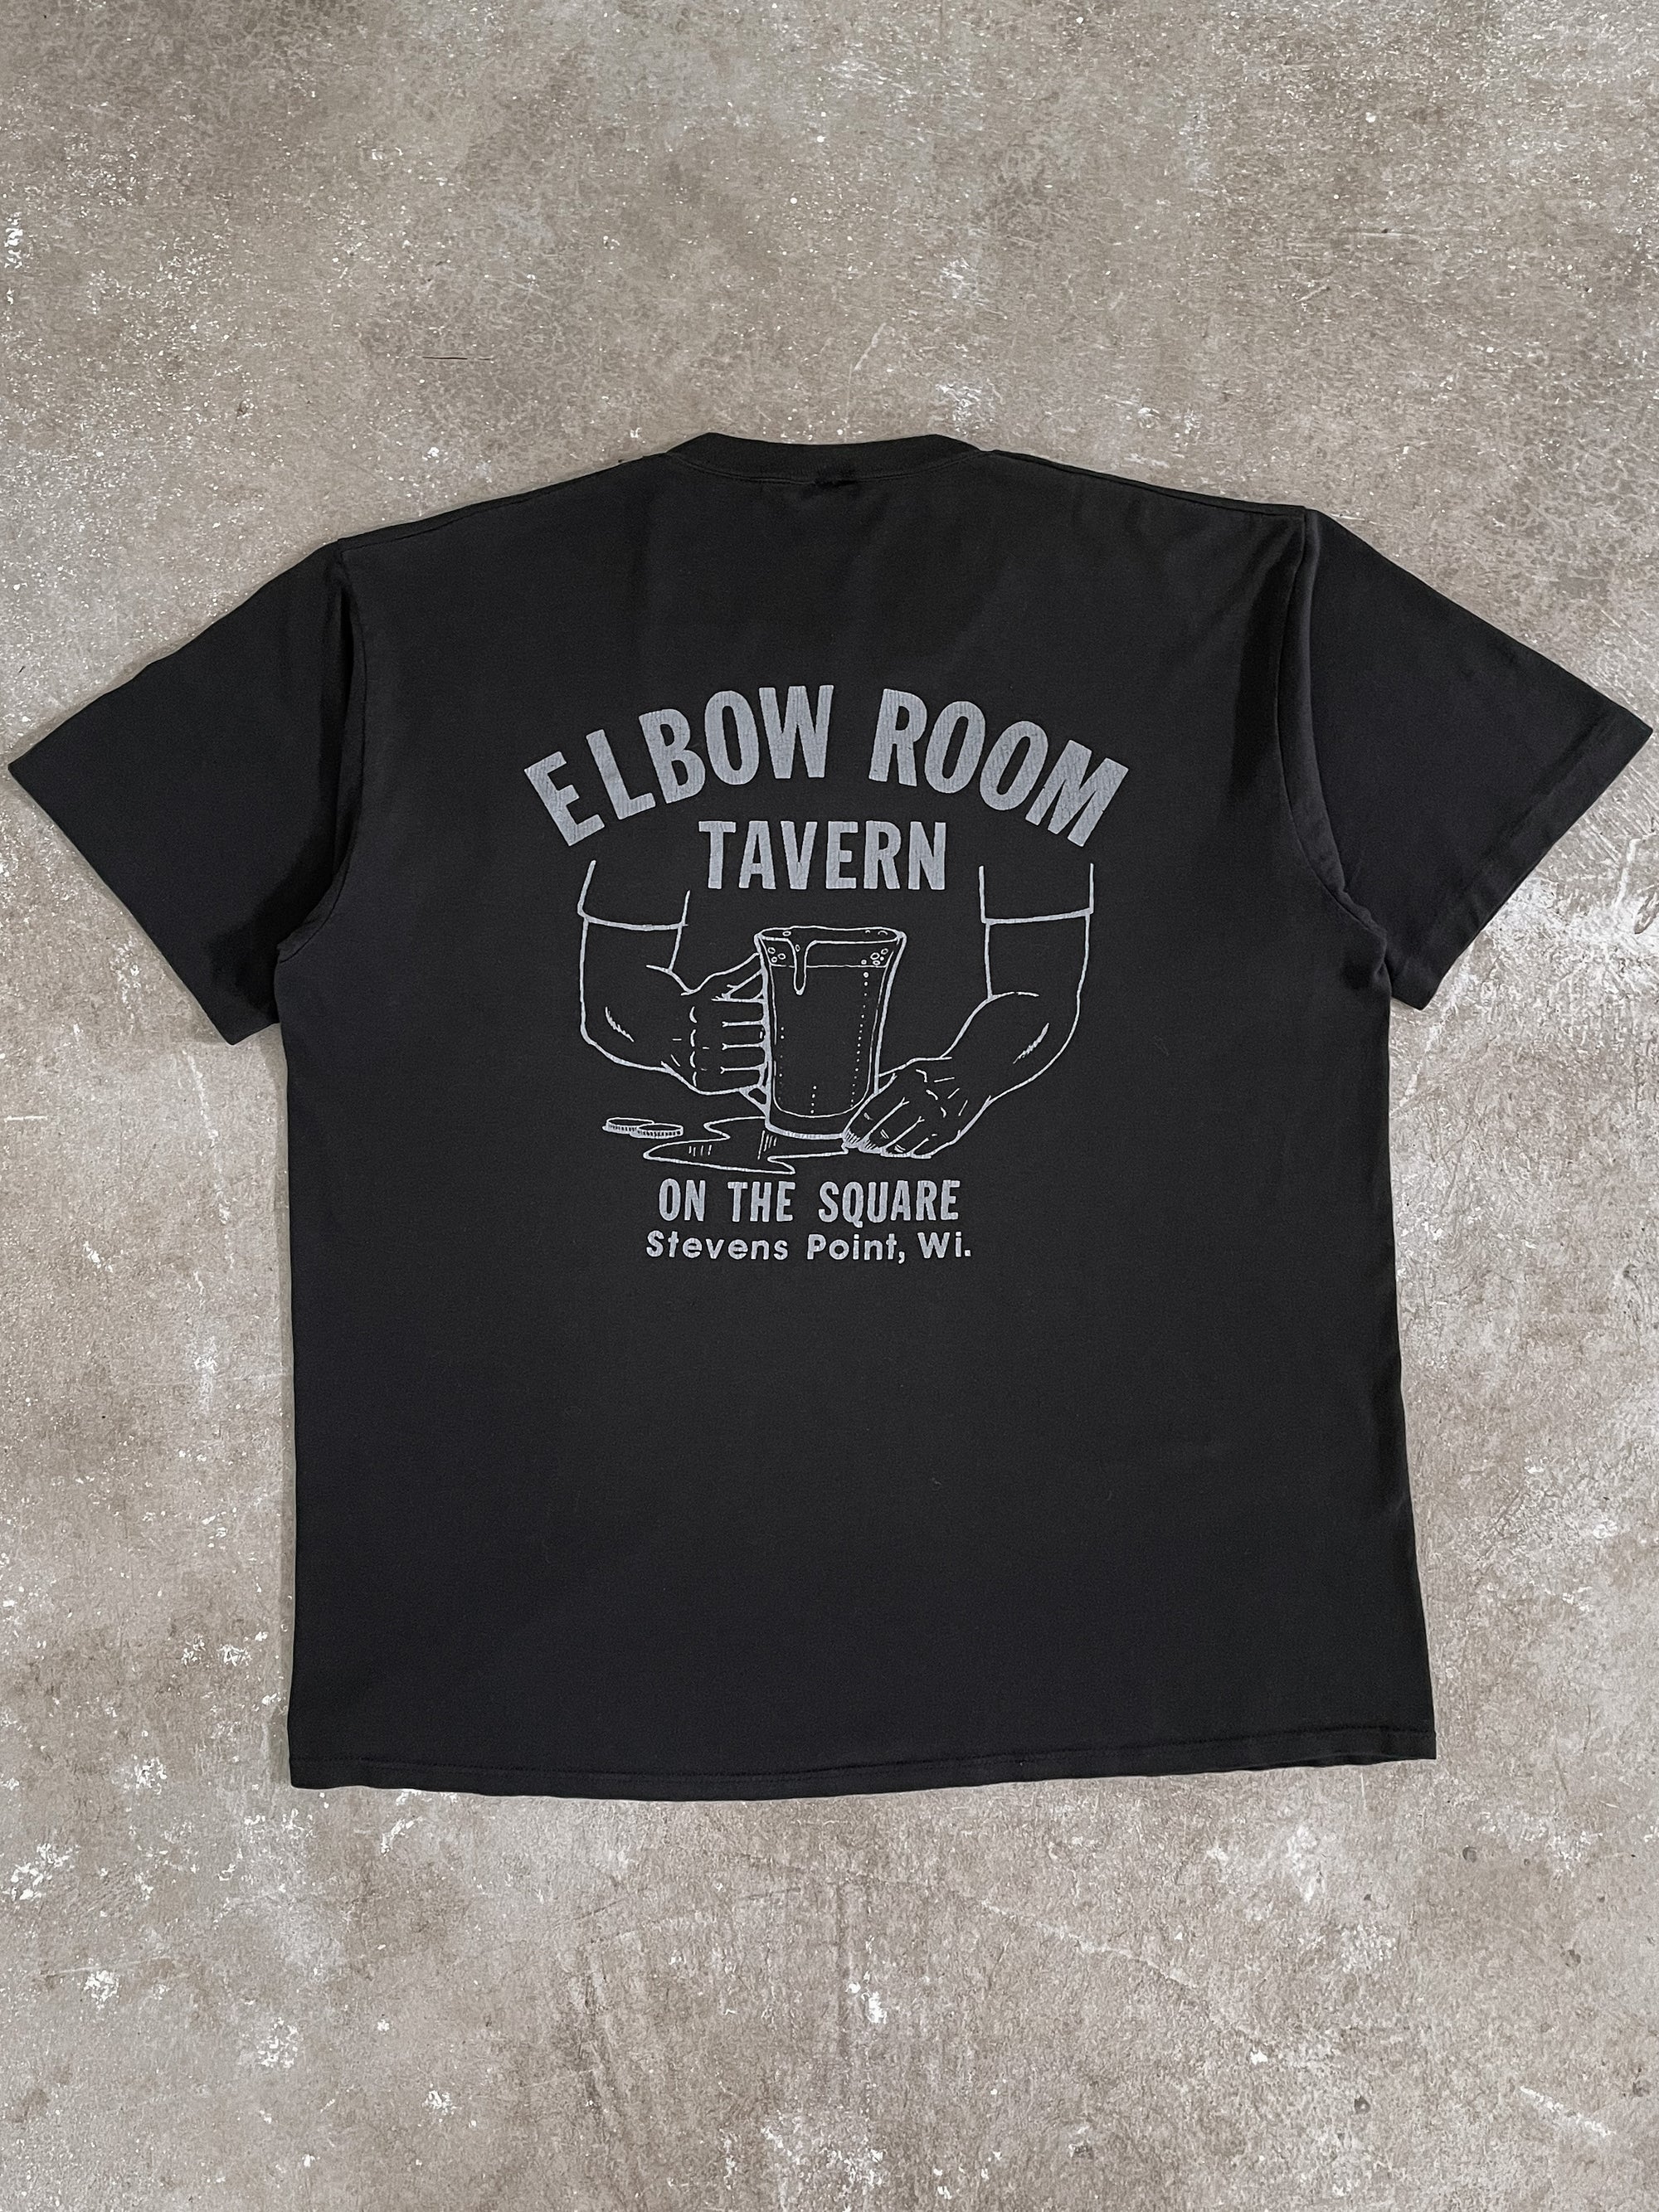 1990s “Elbow Room” Single Stitched Pocket Tee (XL)